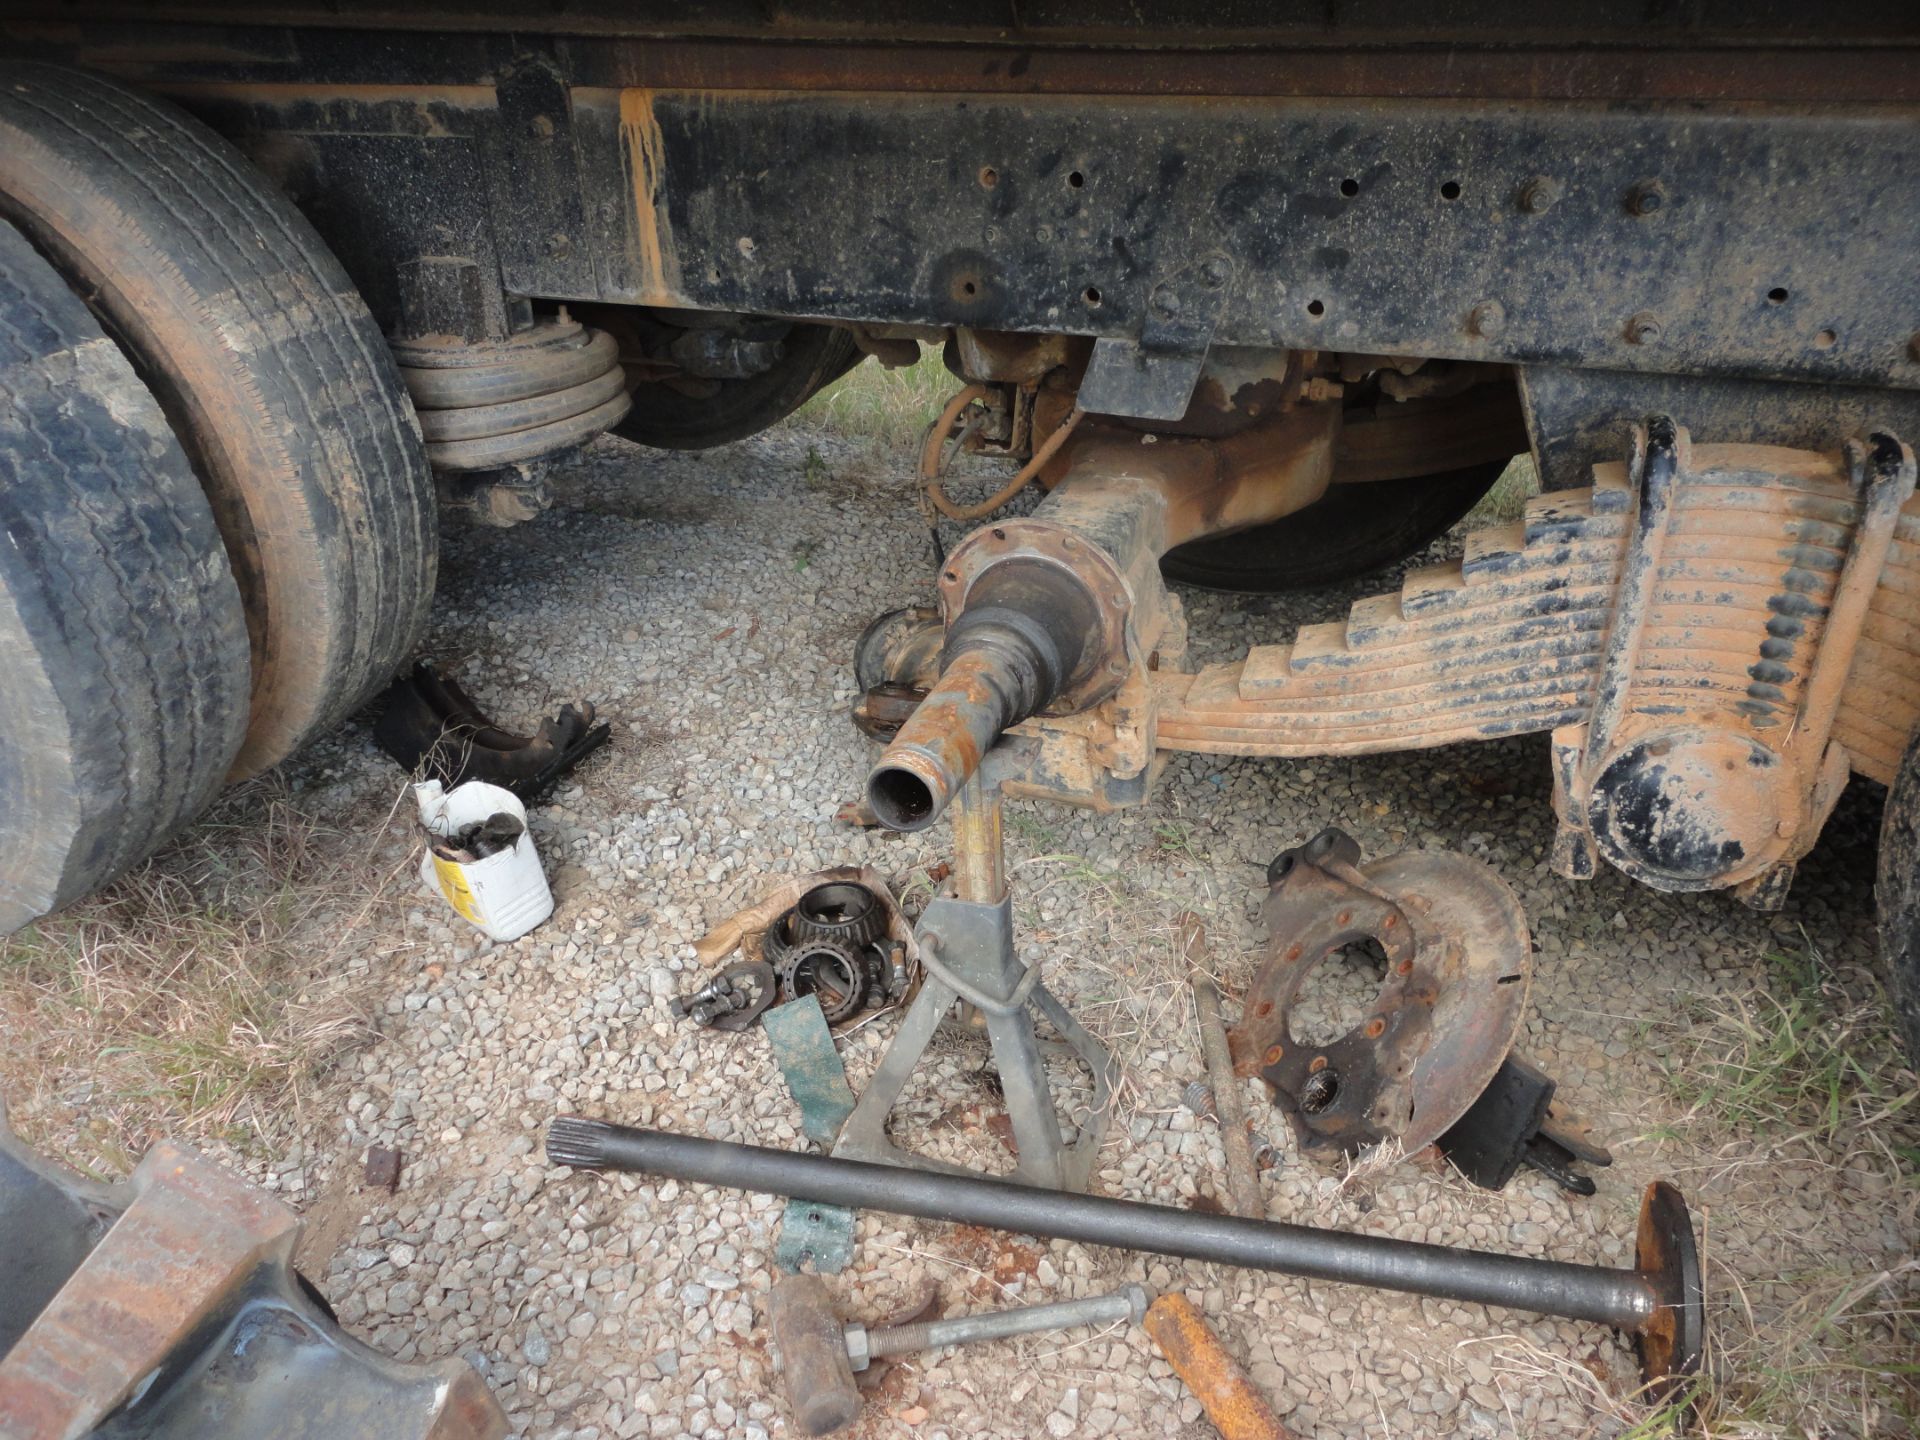 1990 MACK MODEL RD690S TANDEM AXLE AIR CONTROL TAG AXLE, 16' STEEL DUMP BED DUMP TRUCK; W/ POWER - Image 7 of 13